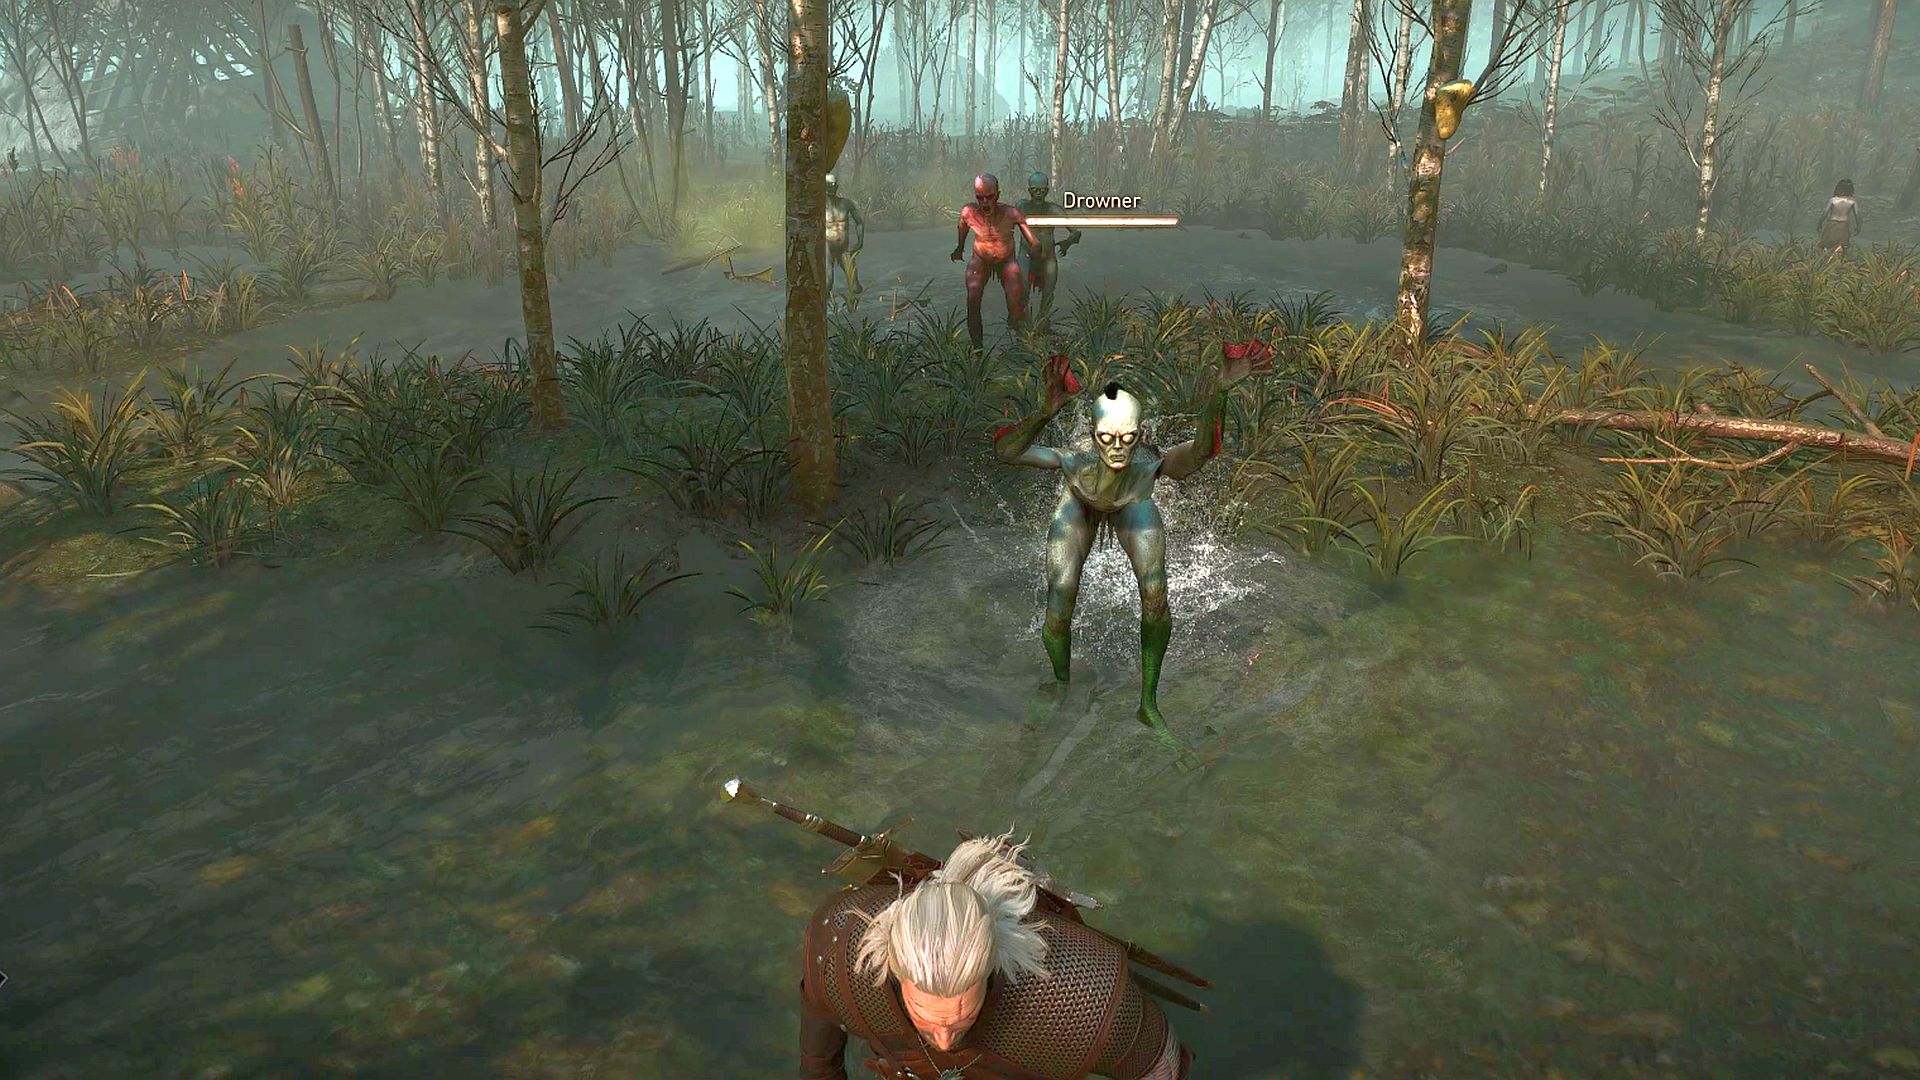 This Witcher 3 mod restores drowners to their E3 2014 style